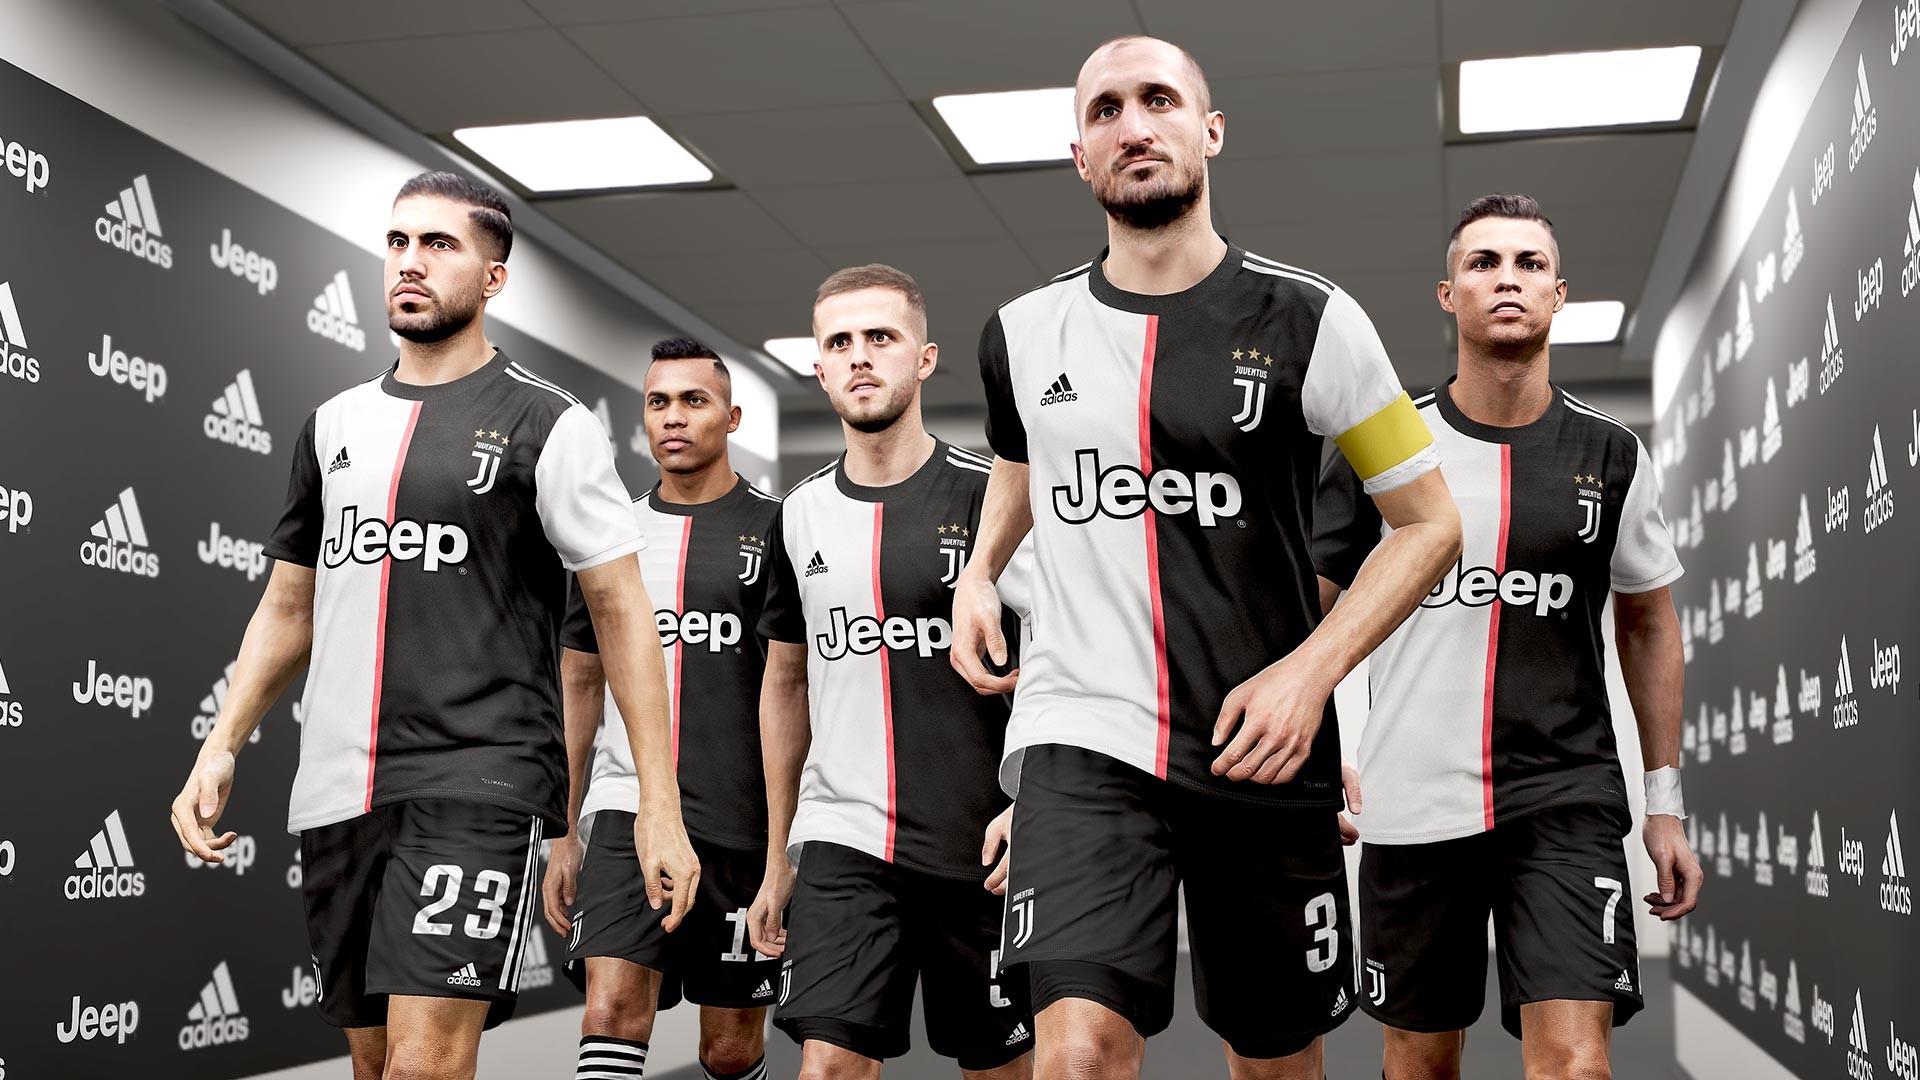 eFootball  PES 2020 Free Download